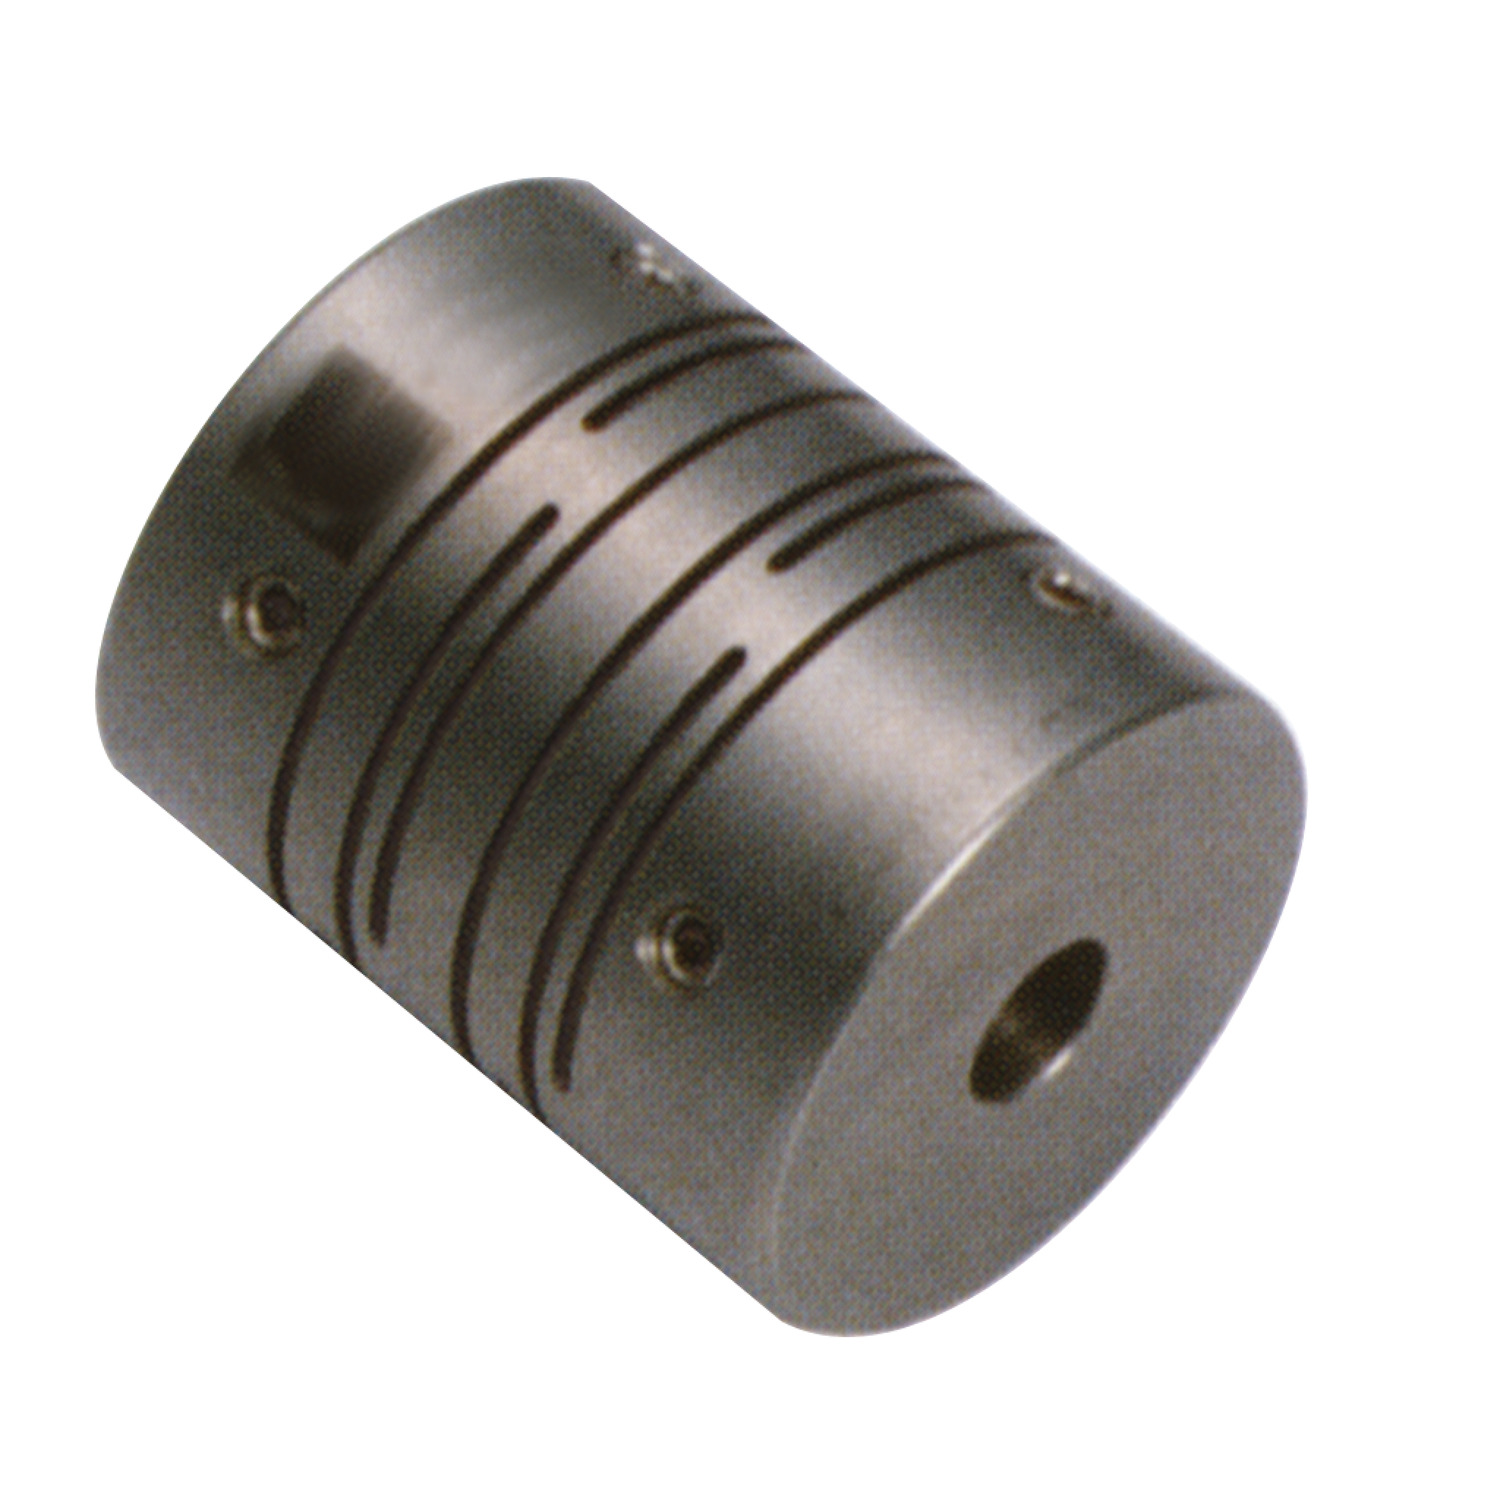 R3002.2 - Spiral Beam Coupling - Stainless Steel